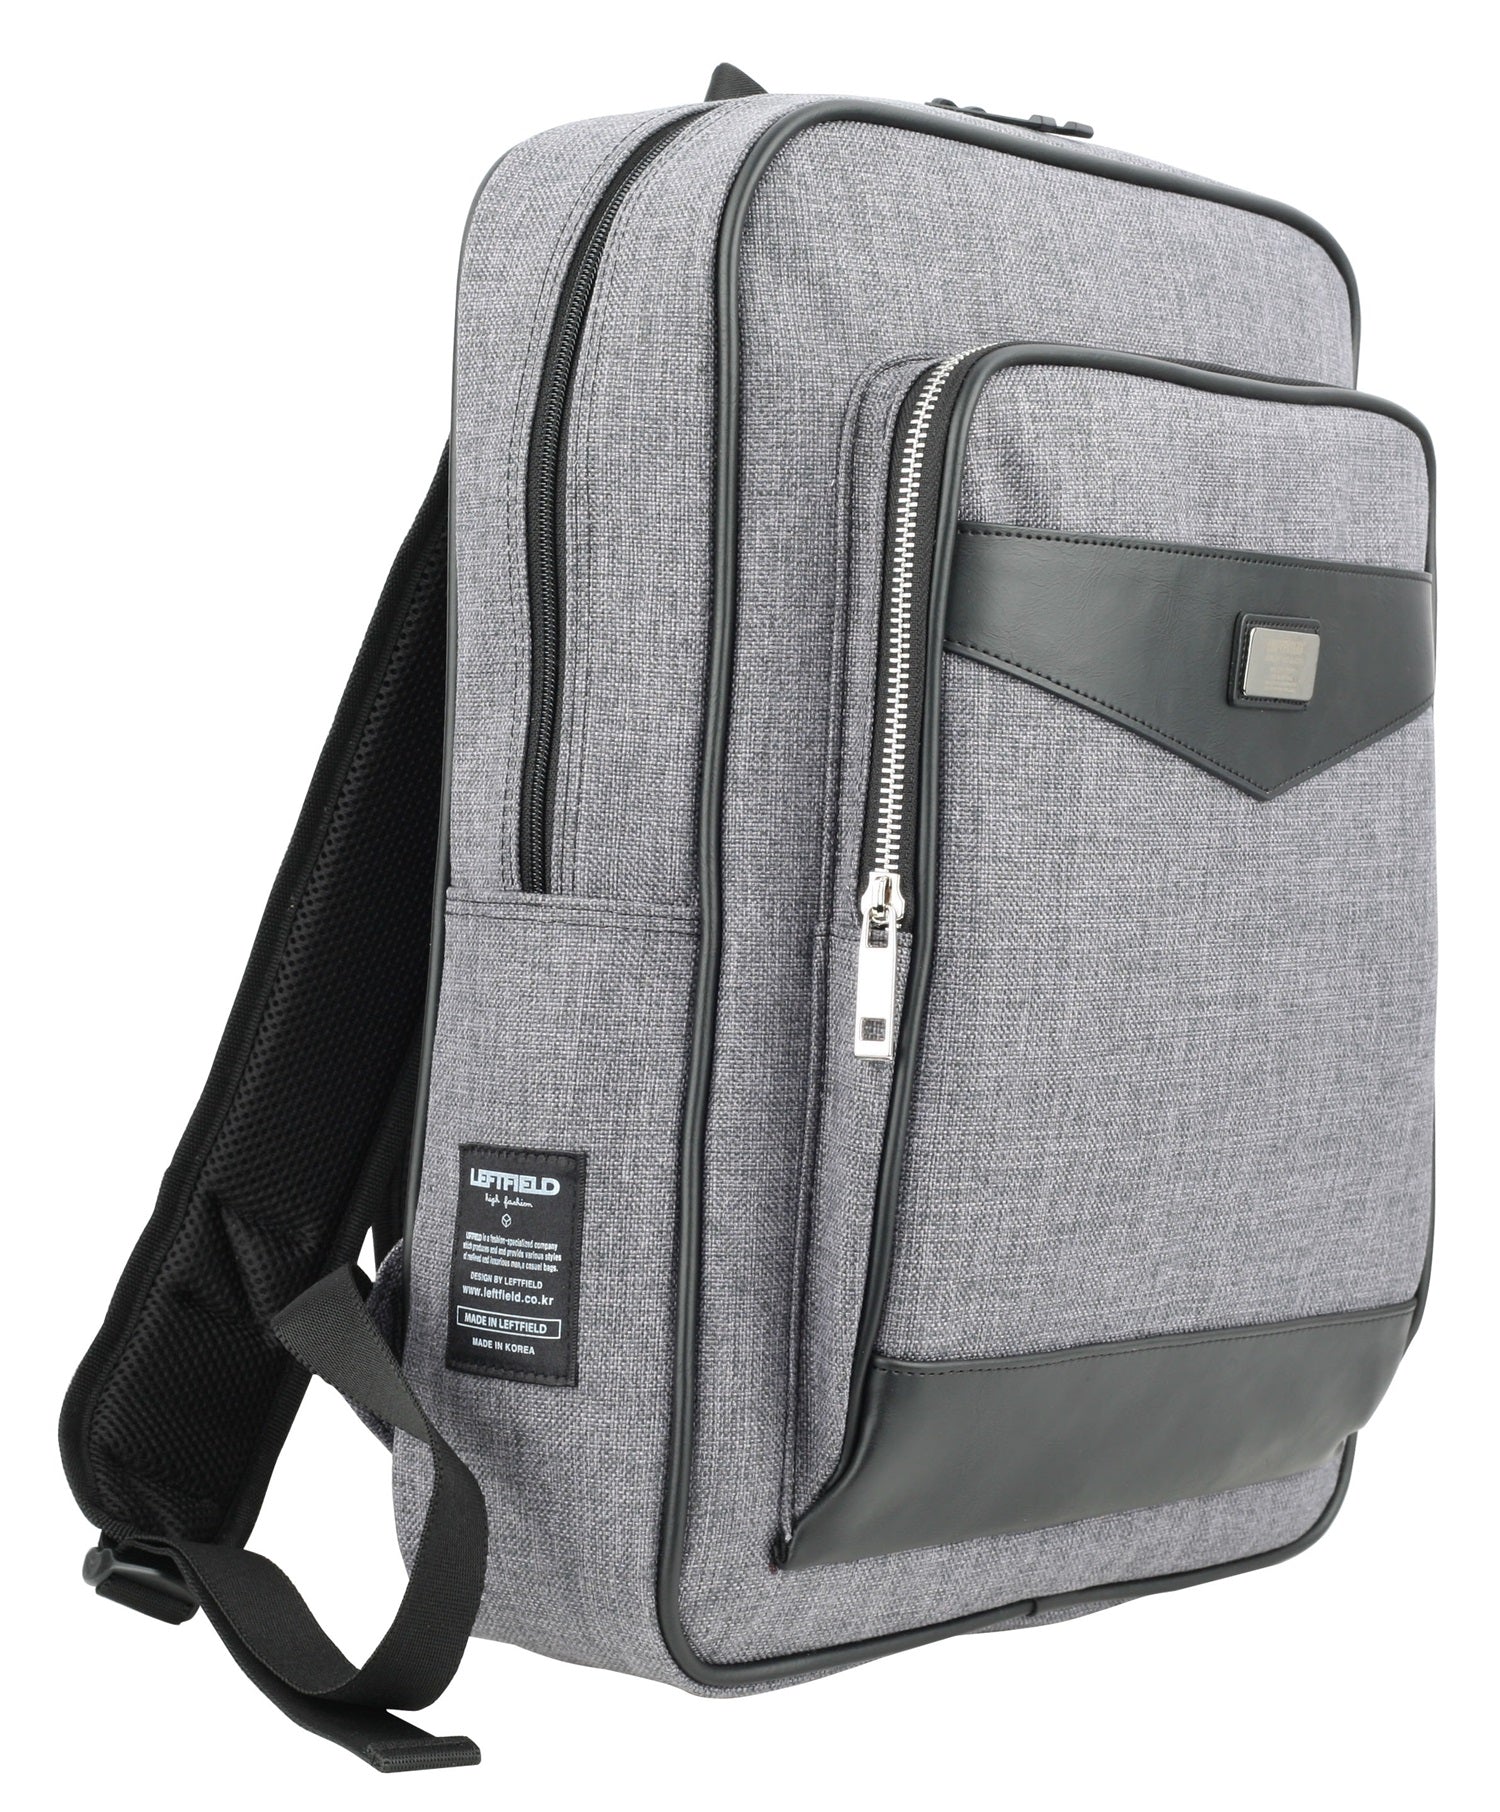 Gray Canvas Faux Leather Paneled School Backpacks